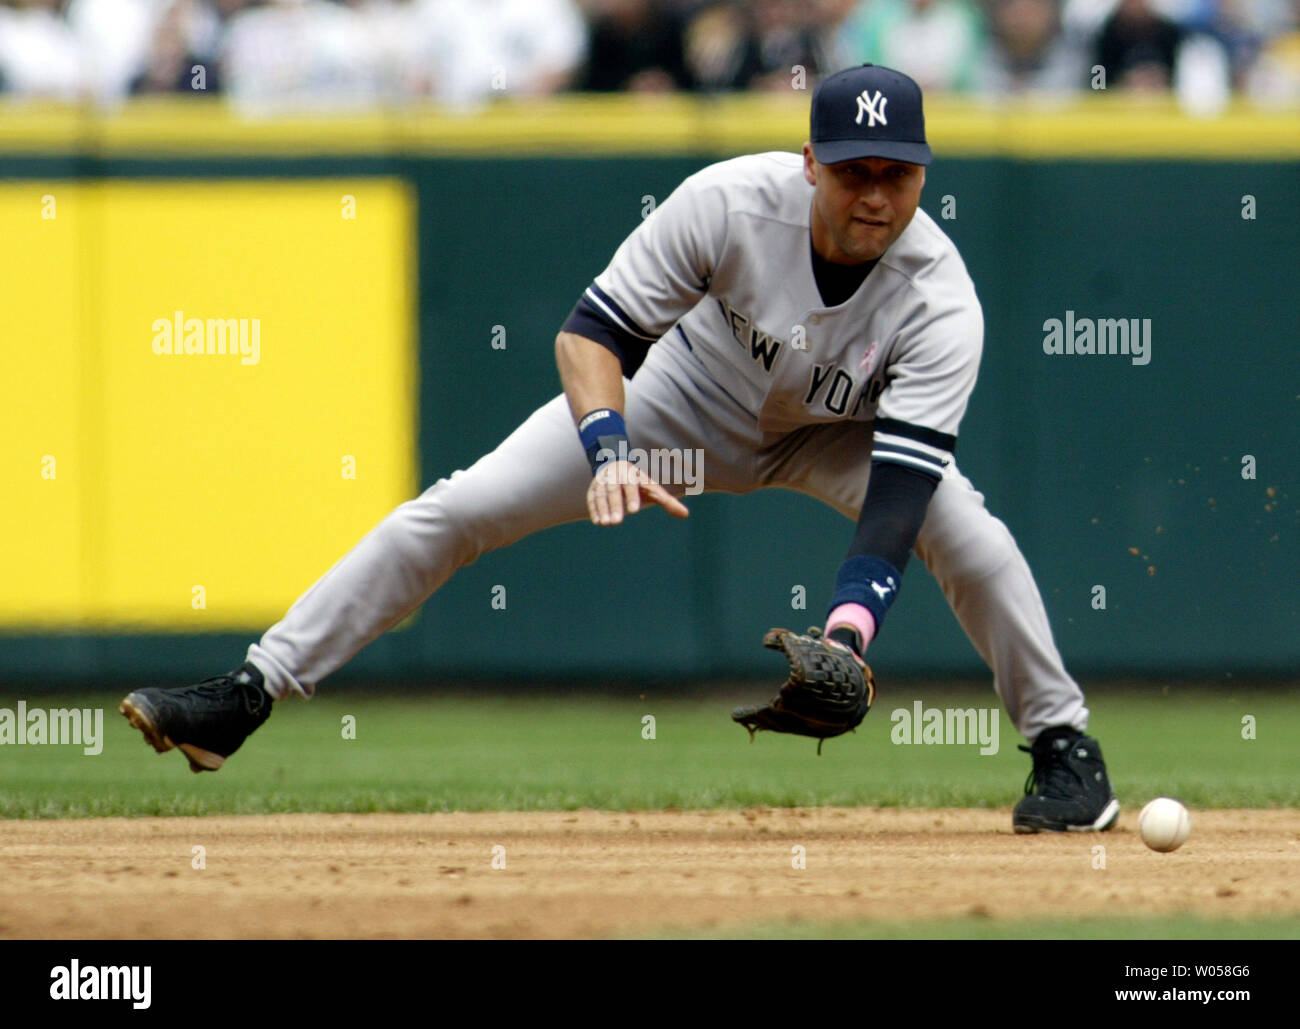 New York Yankees' shortstop Derek Jeter fields a ground ball hit by Seattle  Mariners' Joser Lopez in the second inning at Safeco Field in Seattle on  May 13, 2007. Jeter threw out